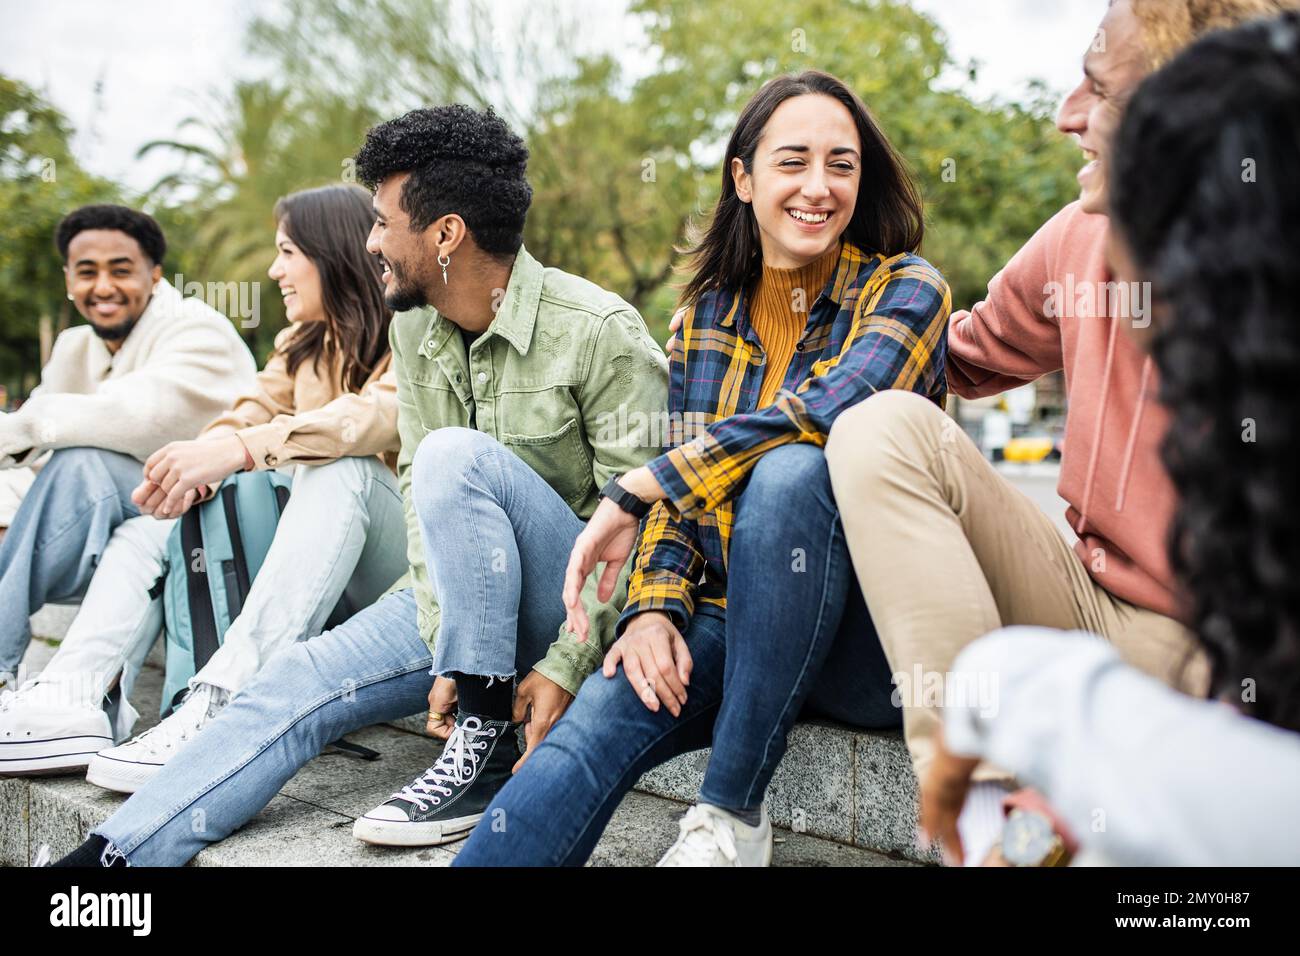 Multi-ethnic young group of united friends laughing while sitting outdoors Stock Photo